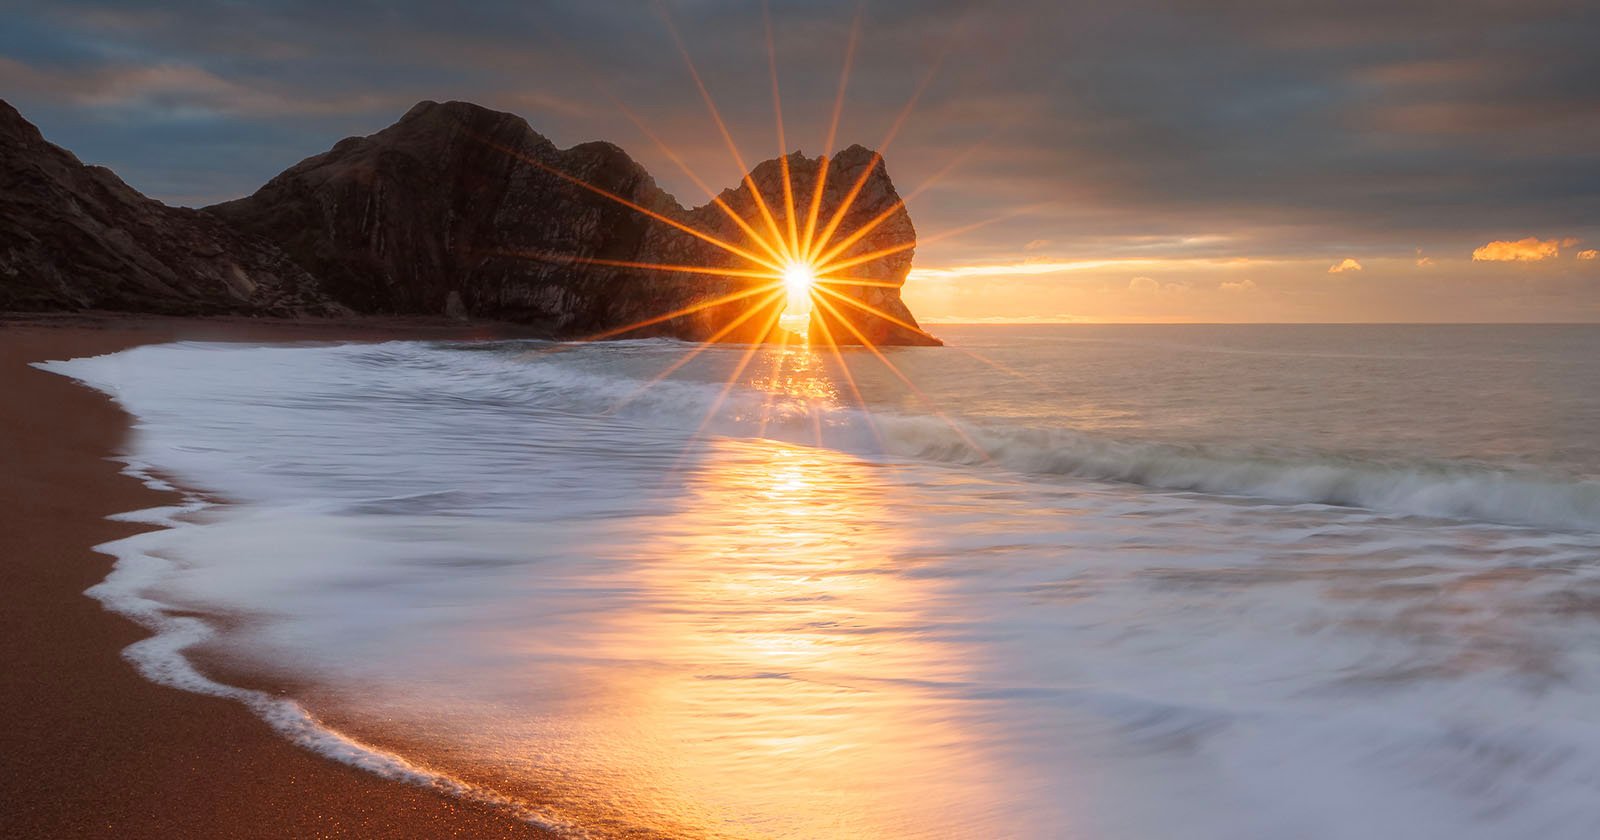 Photographer Made to Wait Four Years for Perfect Sunburst Shot